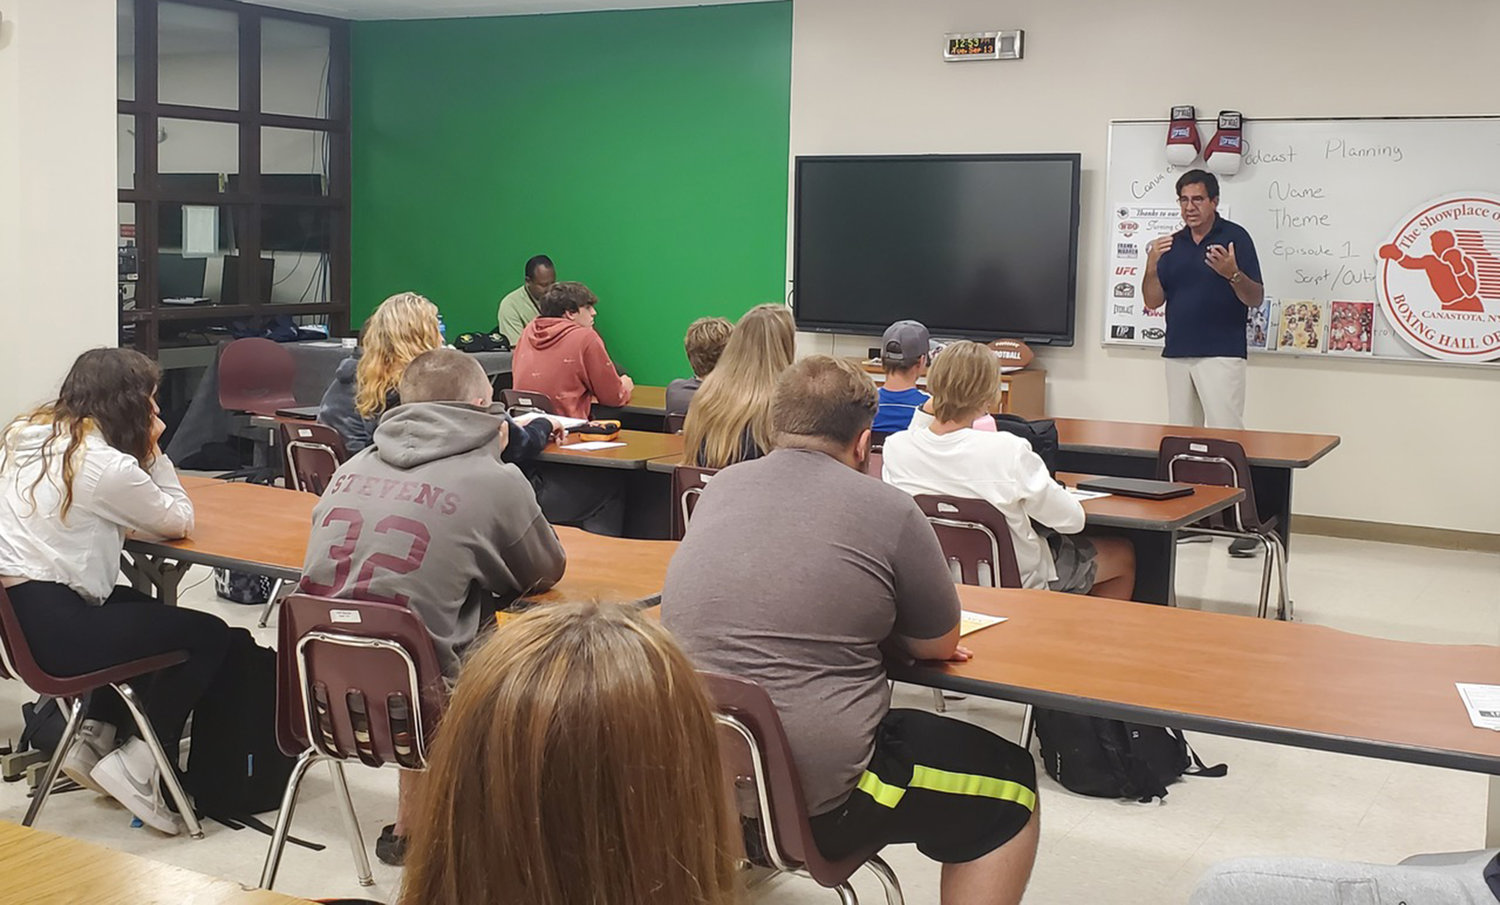 Sports Management and Entertainment Marketing program students listen to a recent classroom presentation by Ed Brophy, executive director from the International Boxing Hall of Fame in Canastota.